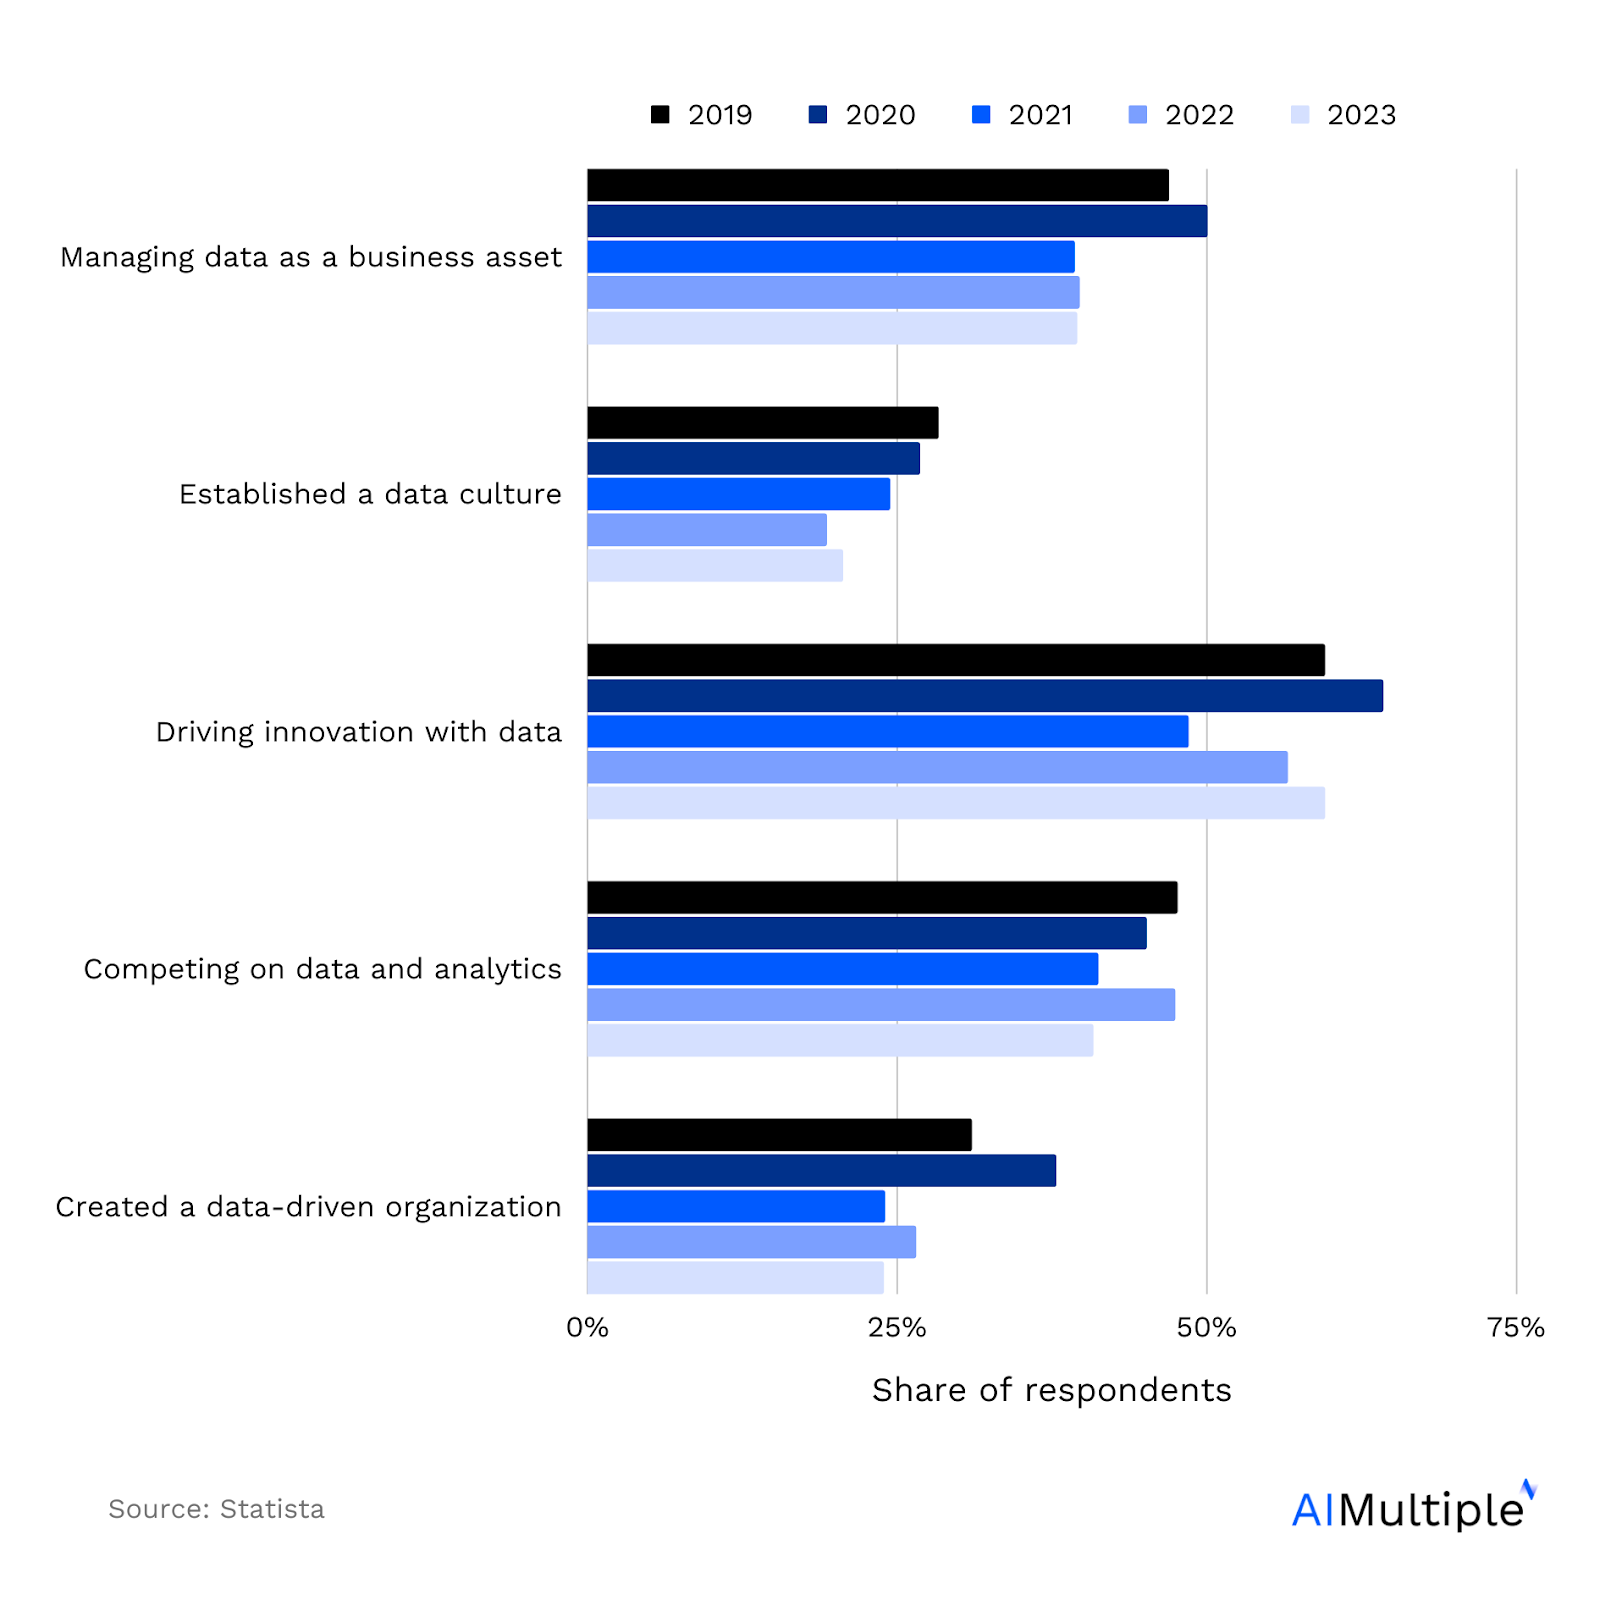 The graphs shows that according to a survey of 116 businesses worldwide, many firms are finding it difficult to make progress in establishing innovative, data driven organizations. This makes knowing the right data collection methods for your AI project, more important.